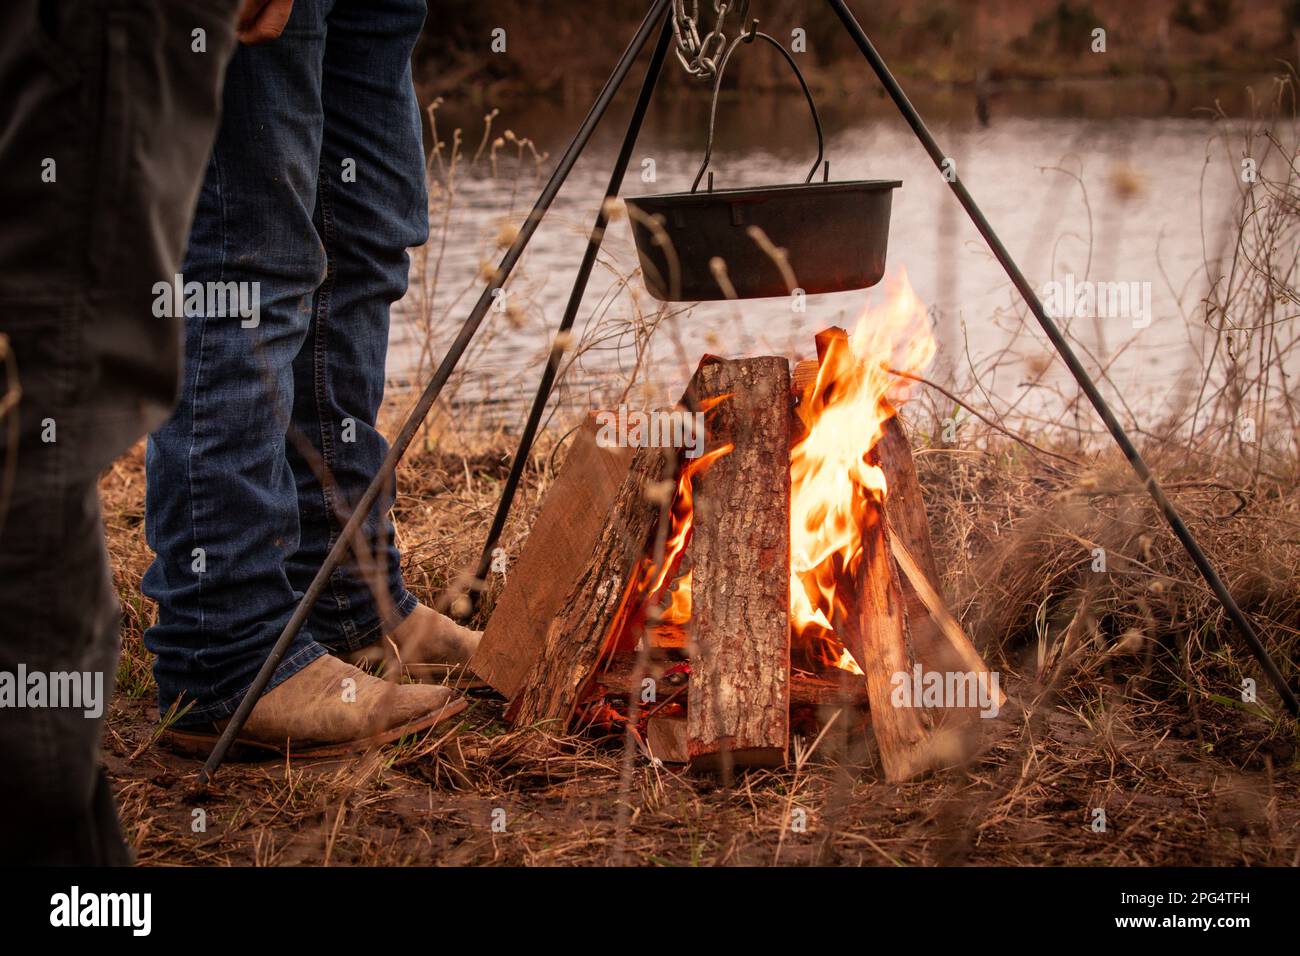 2 Cowboys Cooking Campfire Chili in a Cast Iron Pot Next to the Lake. Stock Photo